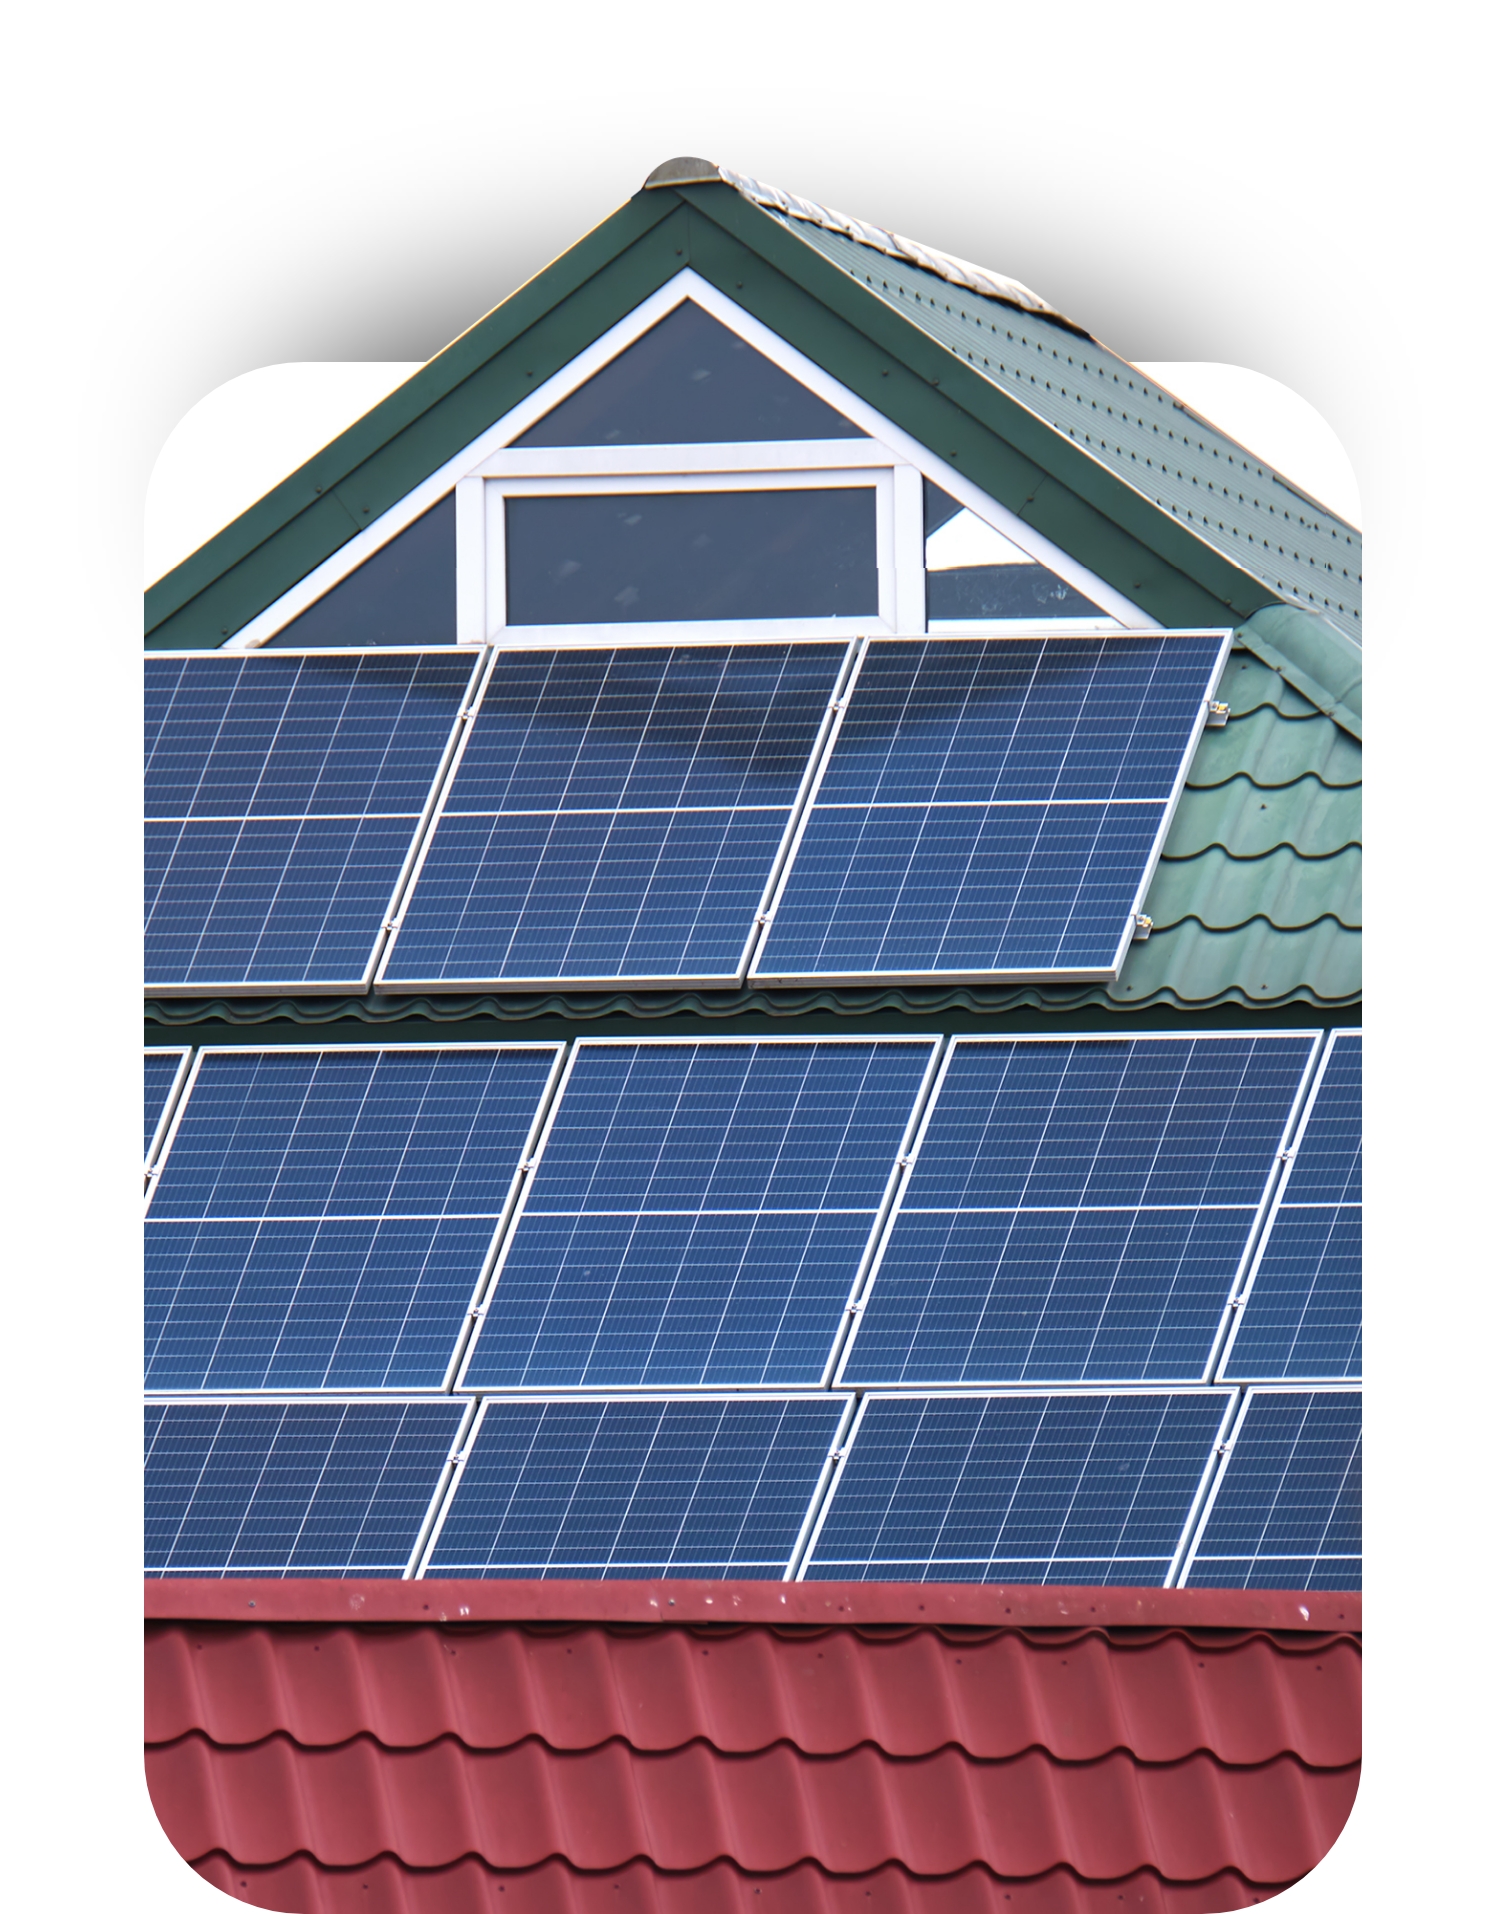 Our solar company excels at solar panel installation for any kind of roof.